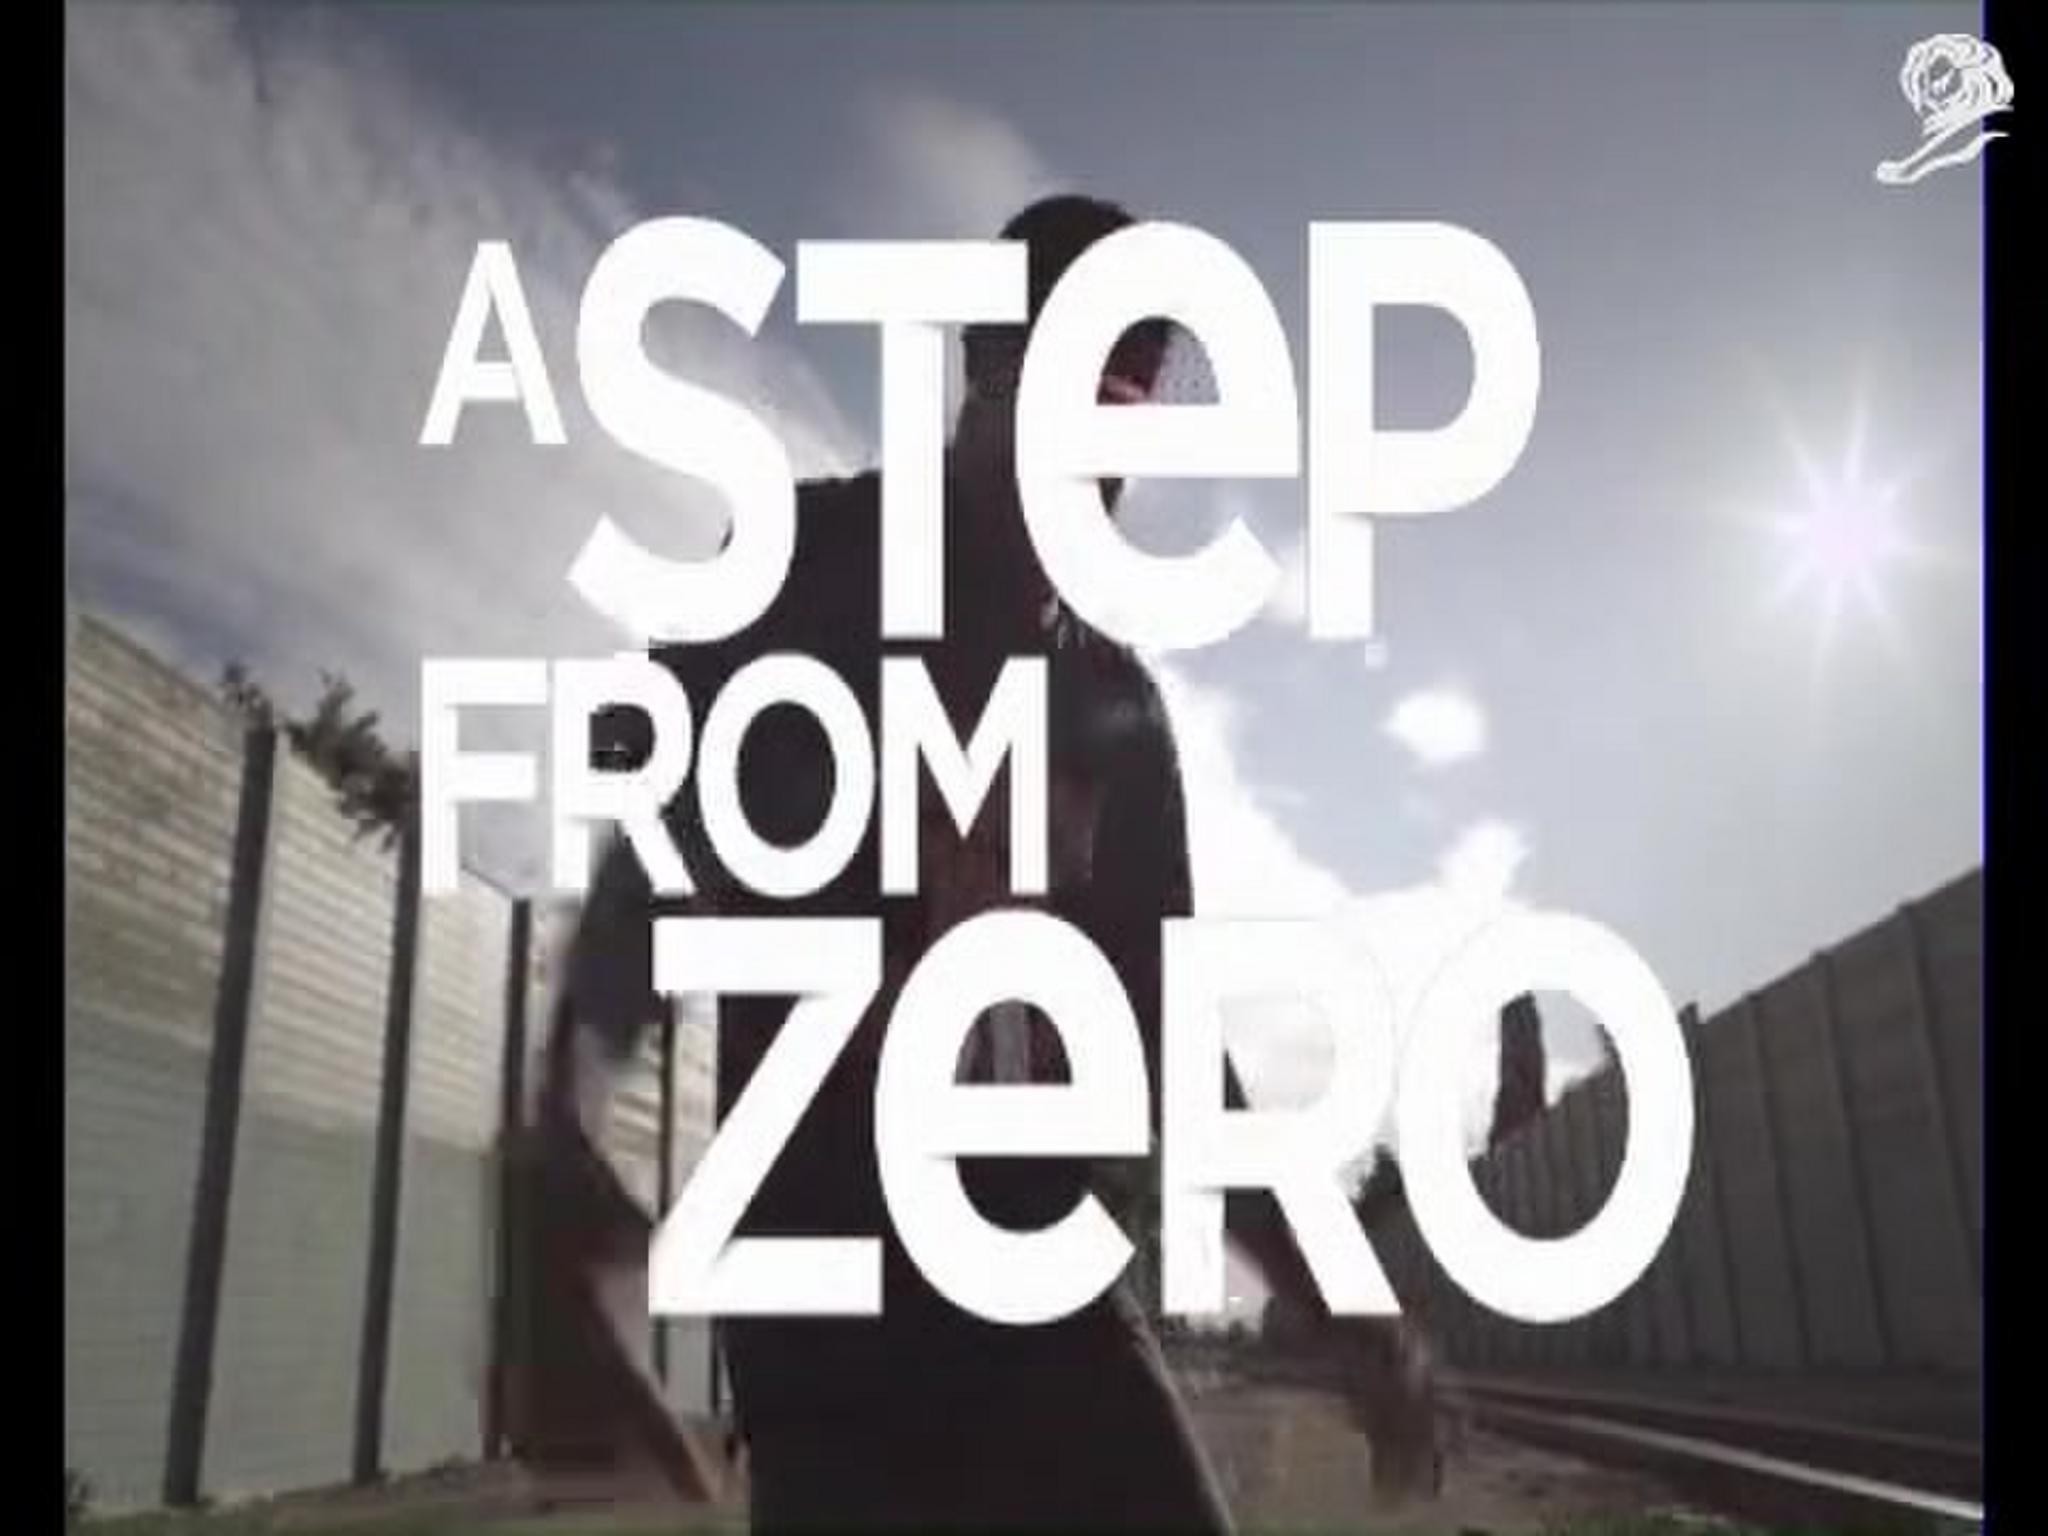 A STEP FROM ZERO